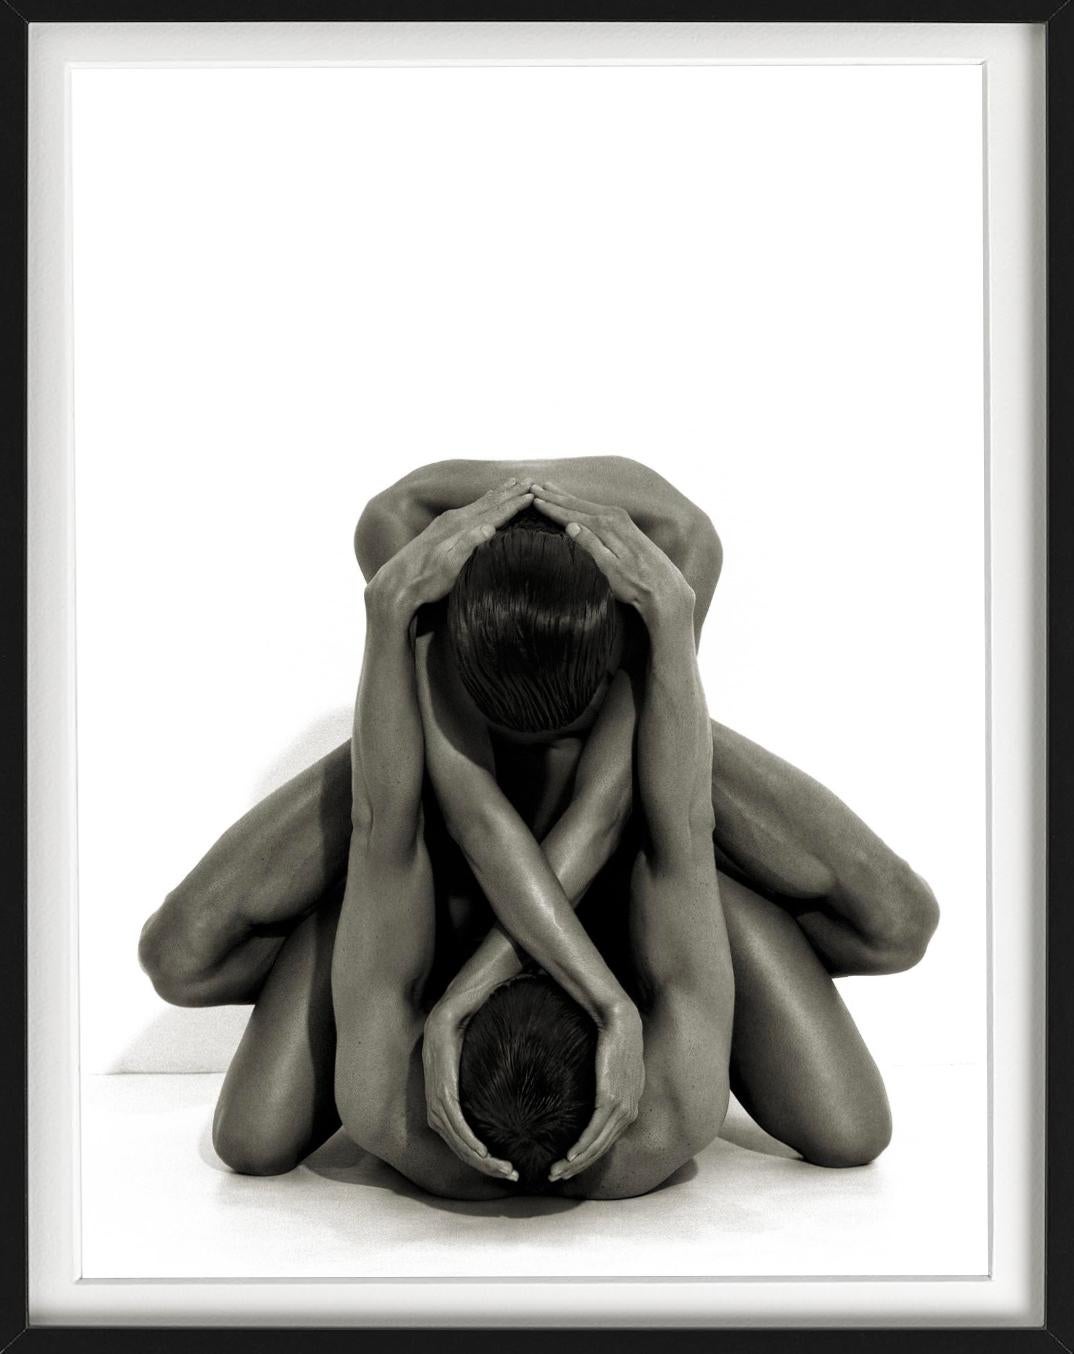 Yvonne & Tom, nude photograph of man and woman intertwined in embrace - Black Figurative Photograph by Andreas H. Bitesnich